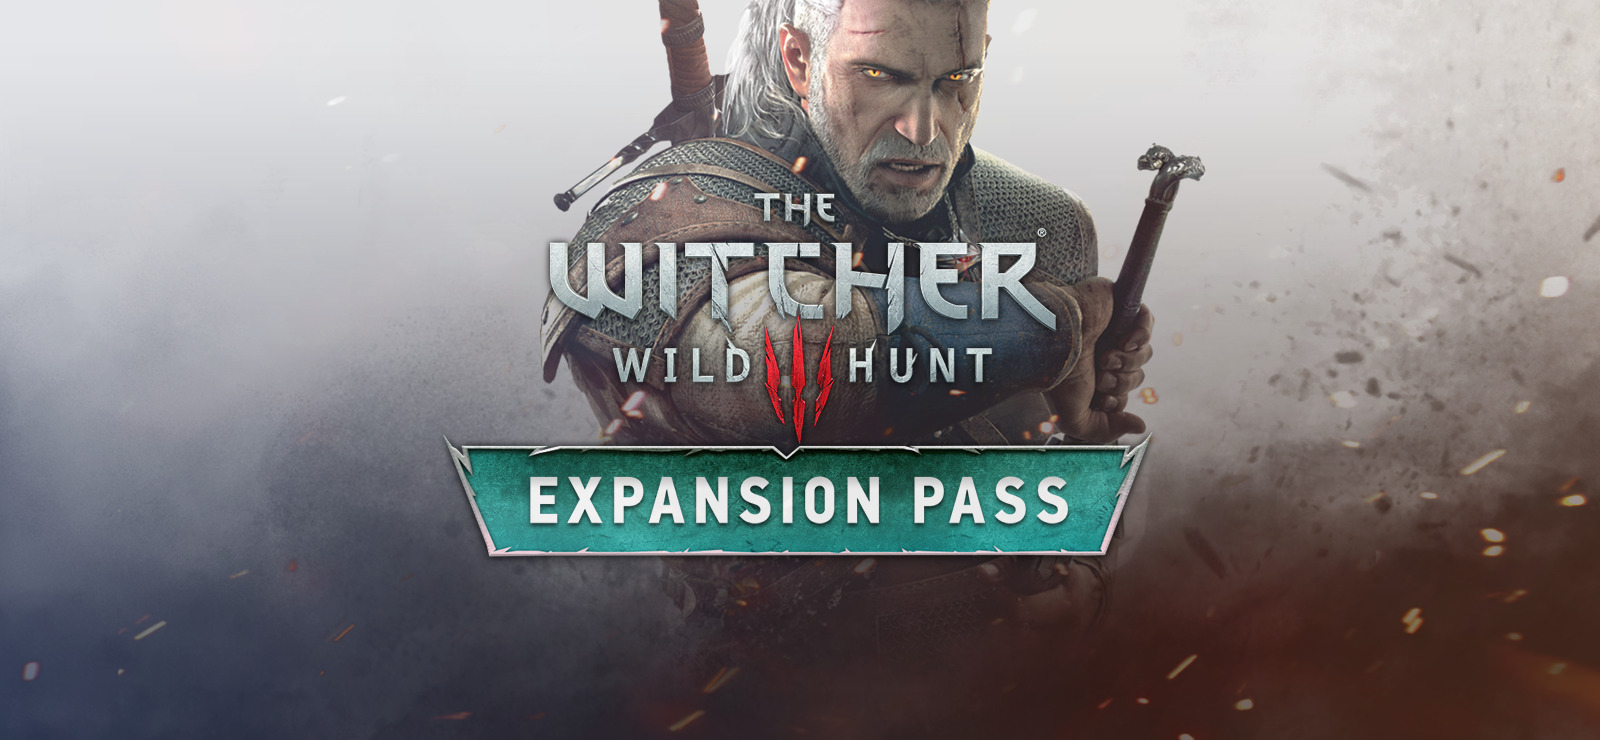 xbox game deals witcher 3 expansion pass